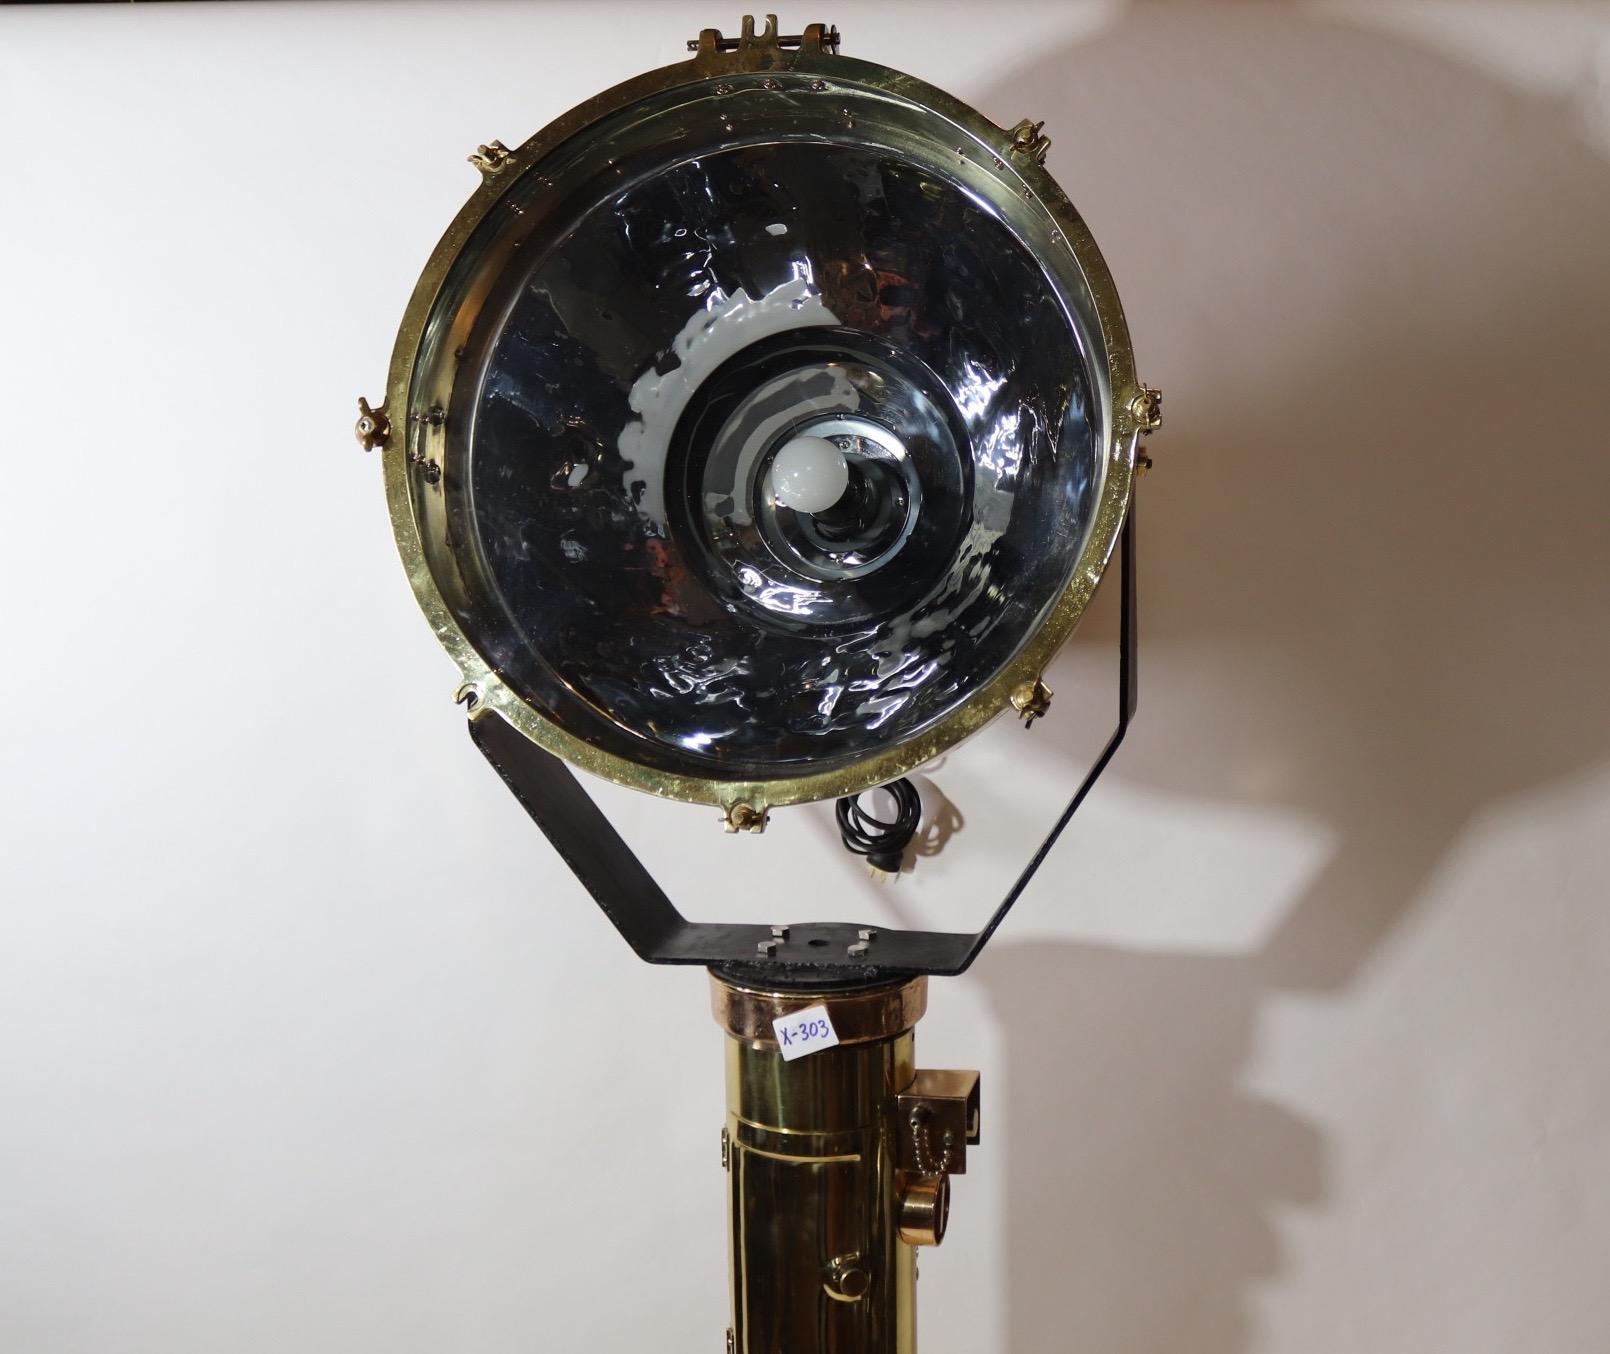 Tripod mounted marine spotlight. Fitted to a maritime compass pedestal, this large Yoke mounted ships floodlight had been meticulously polished and lacquered. With glass lens and polished besel. Recently rewired and fitted with a new socket, circa